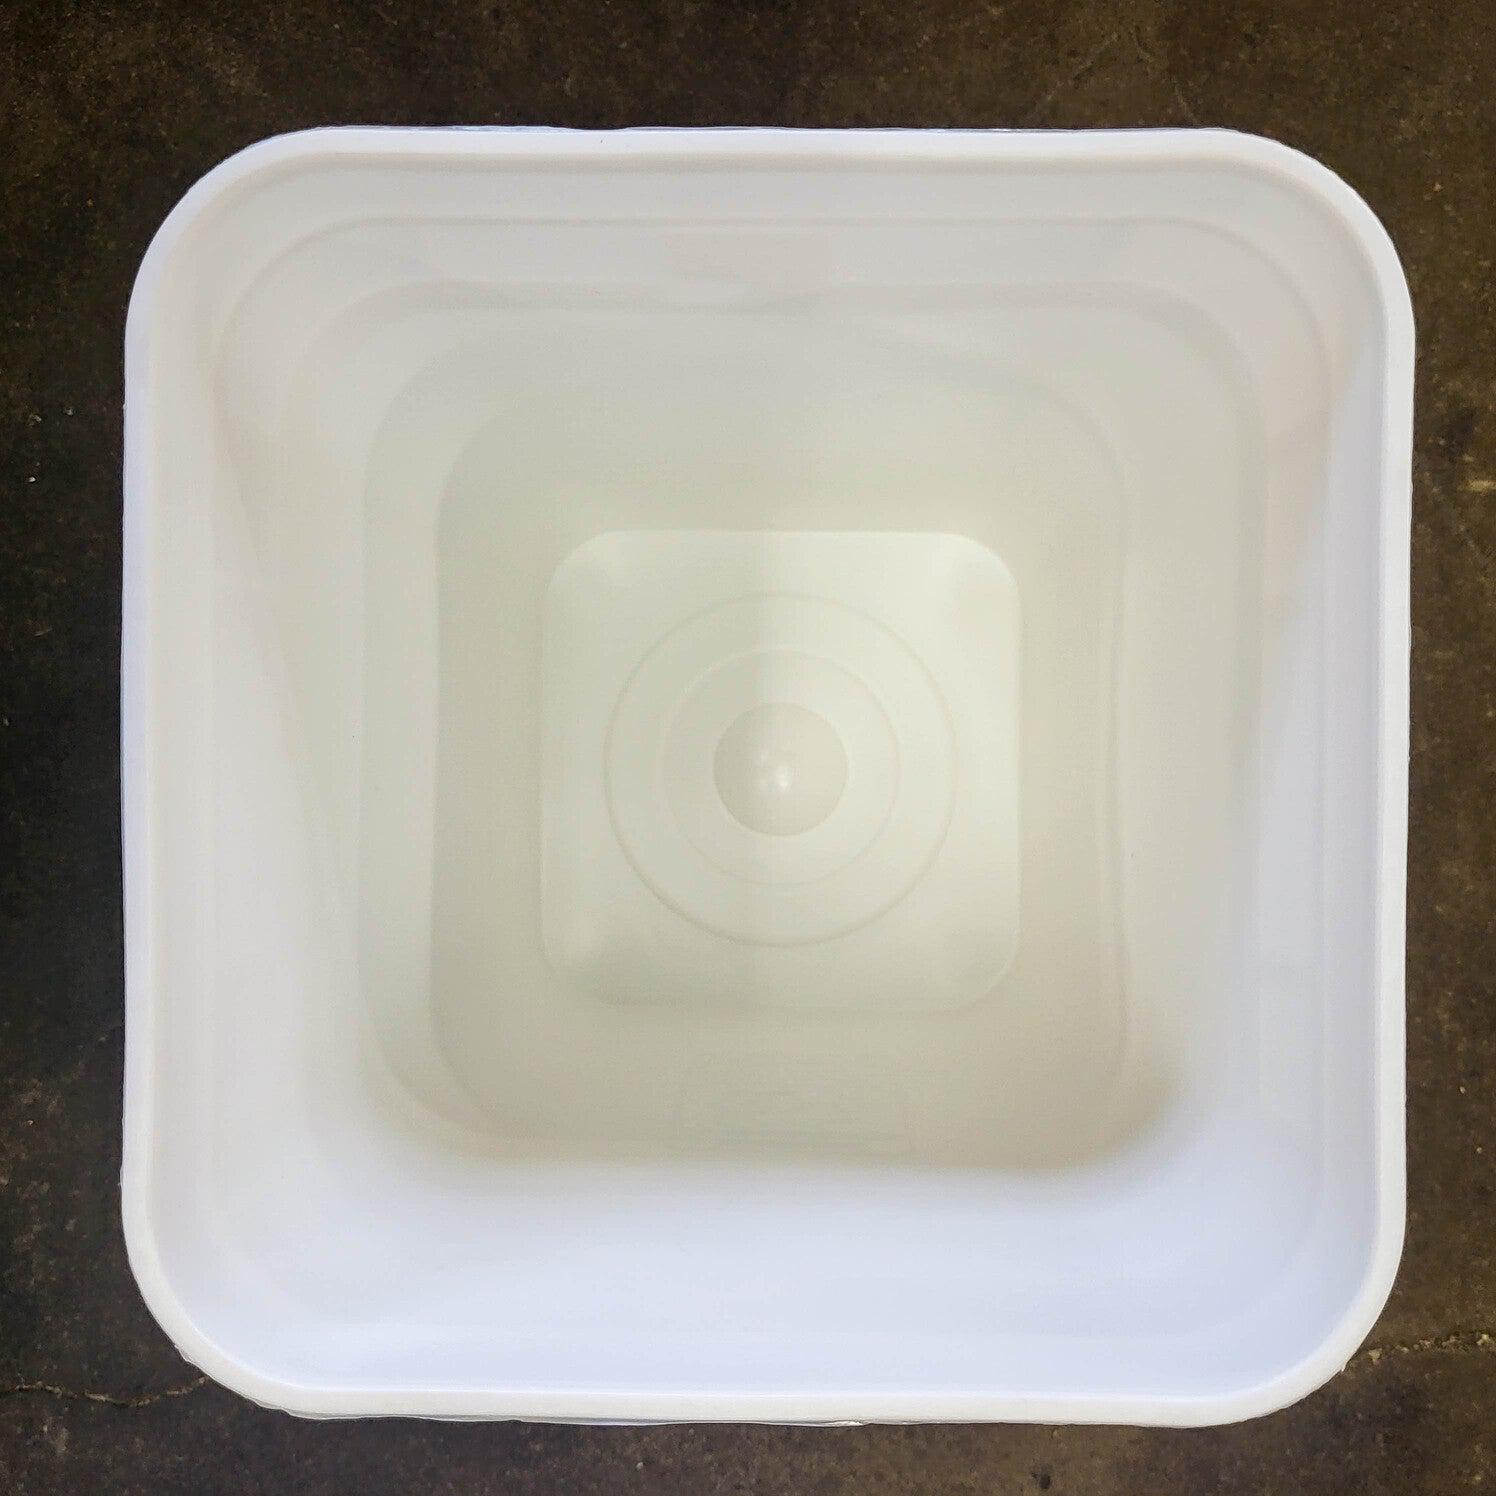 4 Gallon Square Bucket and Lid with Gasket